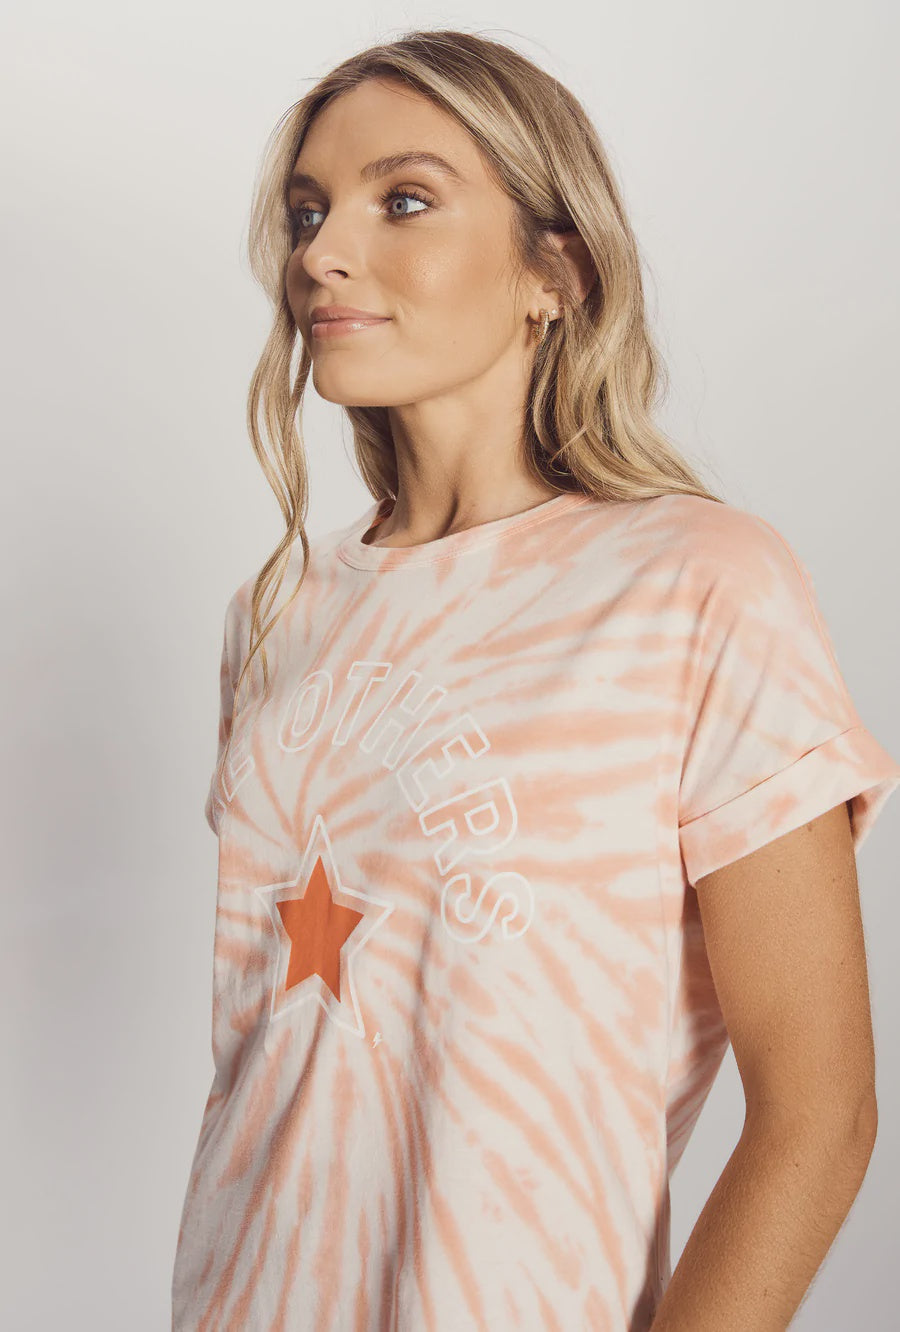 The Relaxed Tee - Peach Tie Dye - Tops